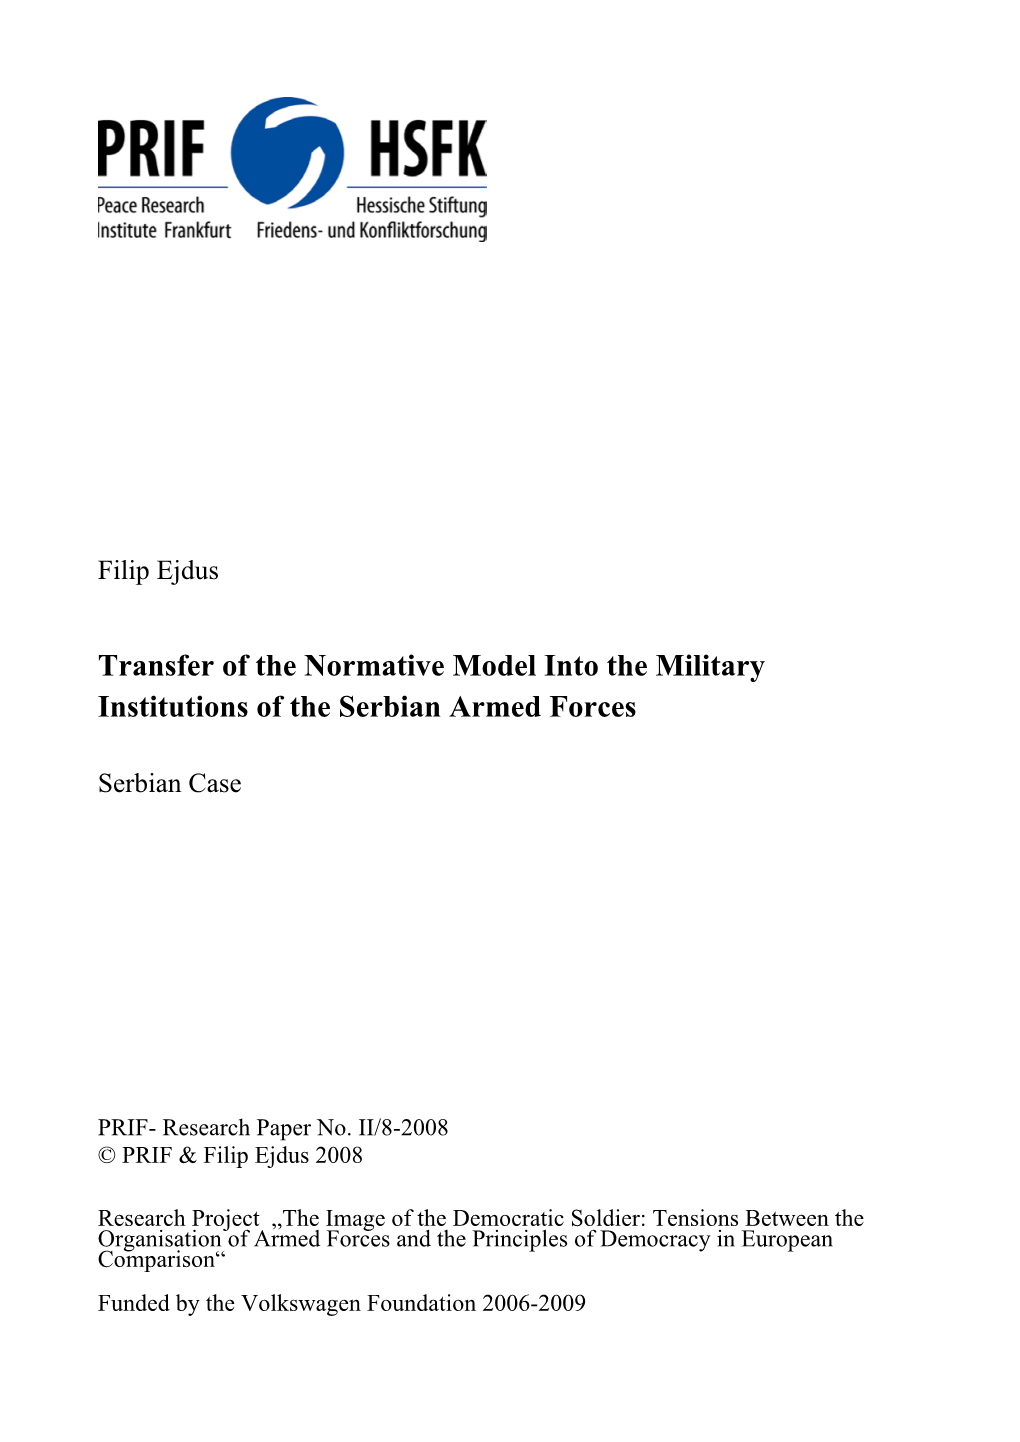 Transfer of the Normative Model Into the Military Institutions of the Serbian Armed Forces